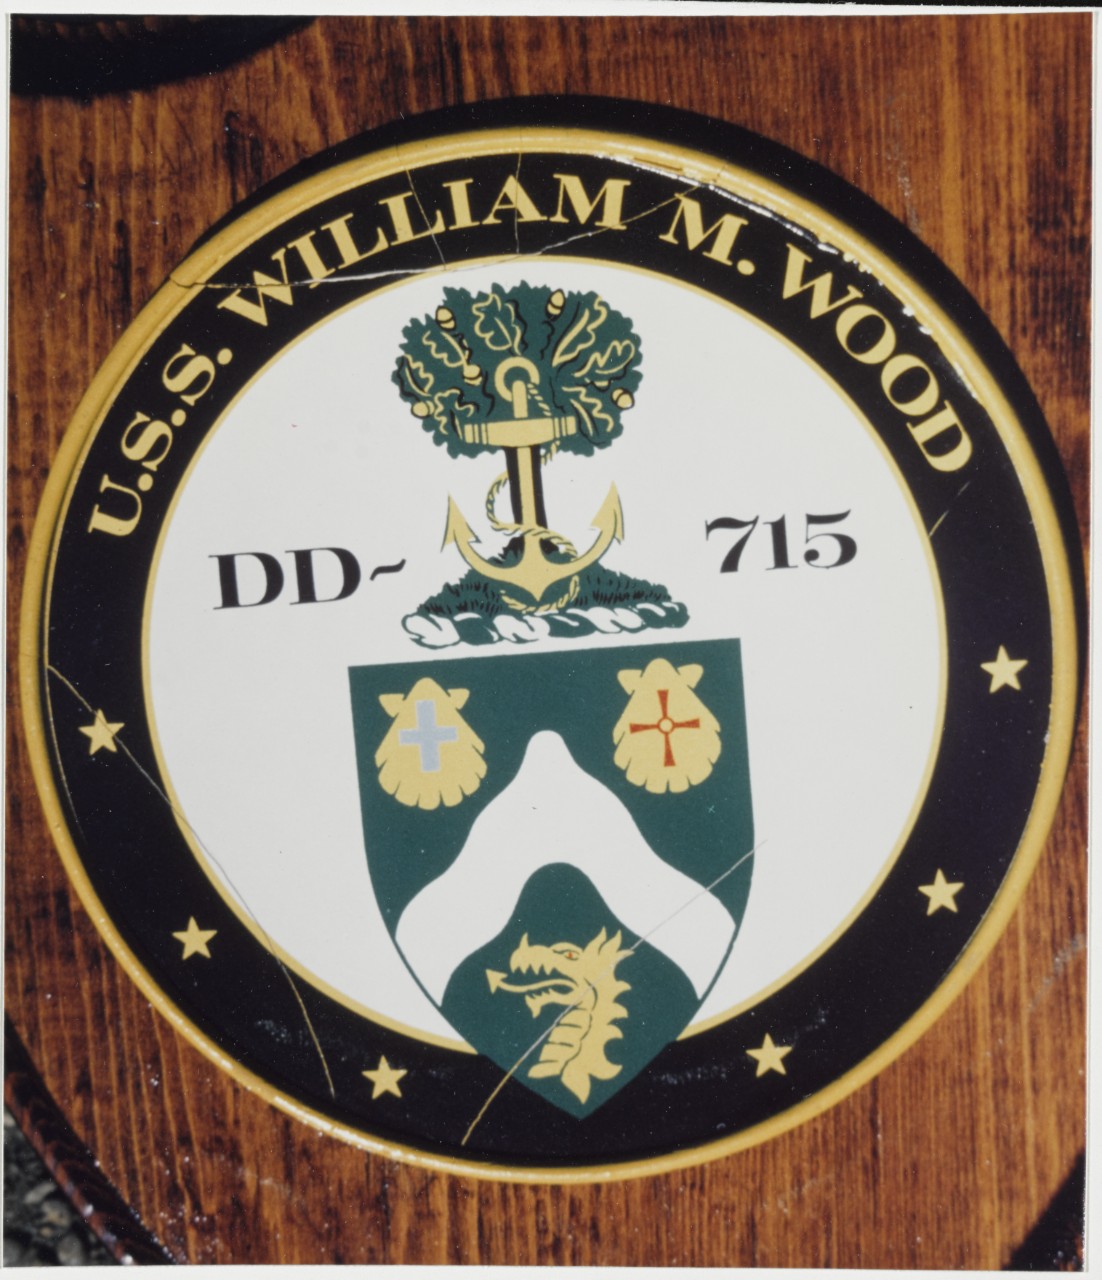 insignia of UUS William M. Wood (DD-715) that features an anchor, shells, and a dragon